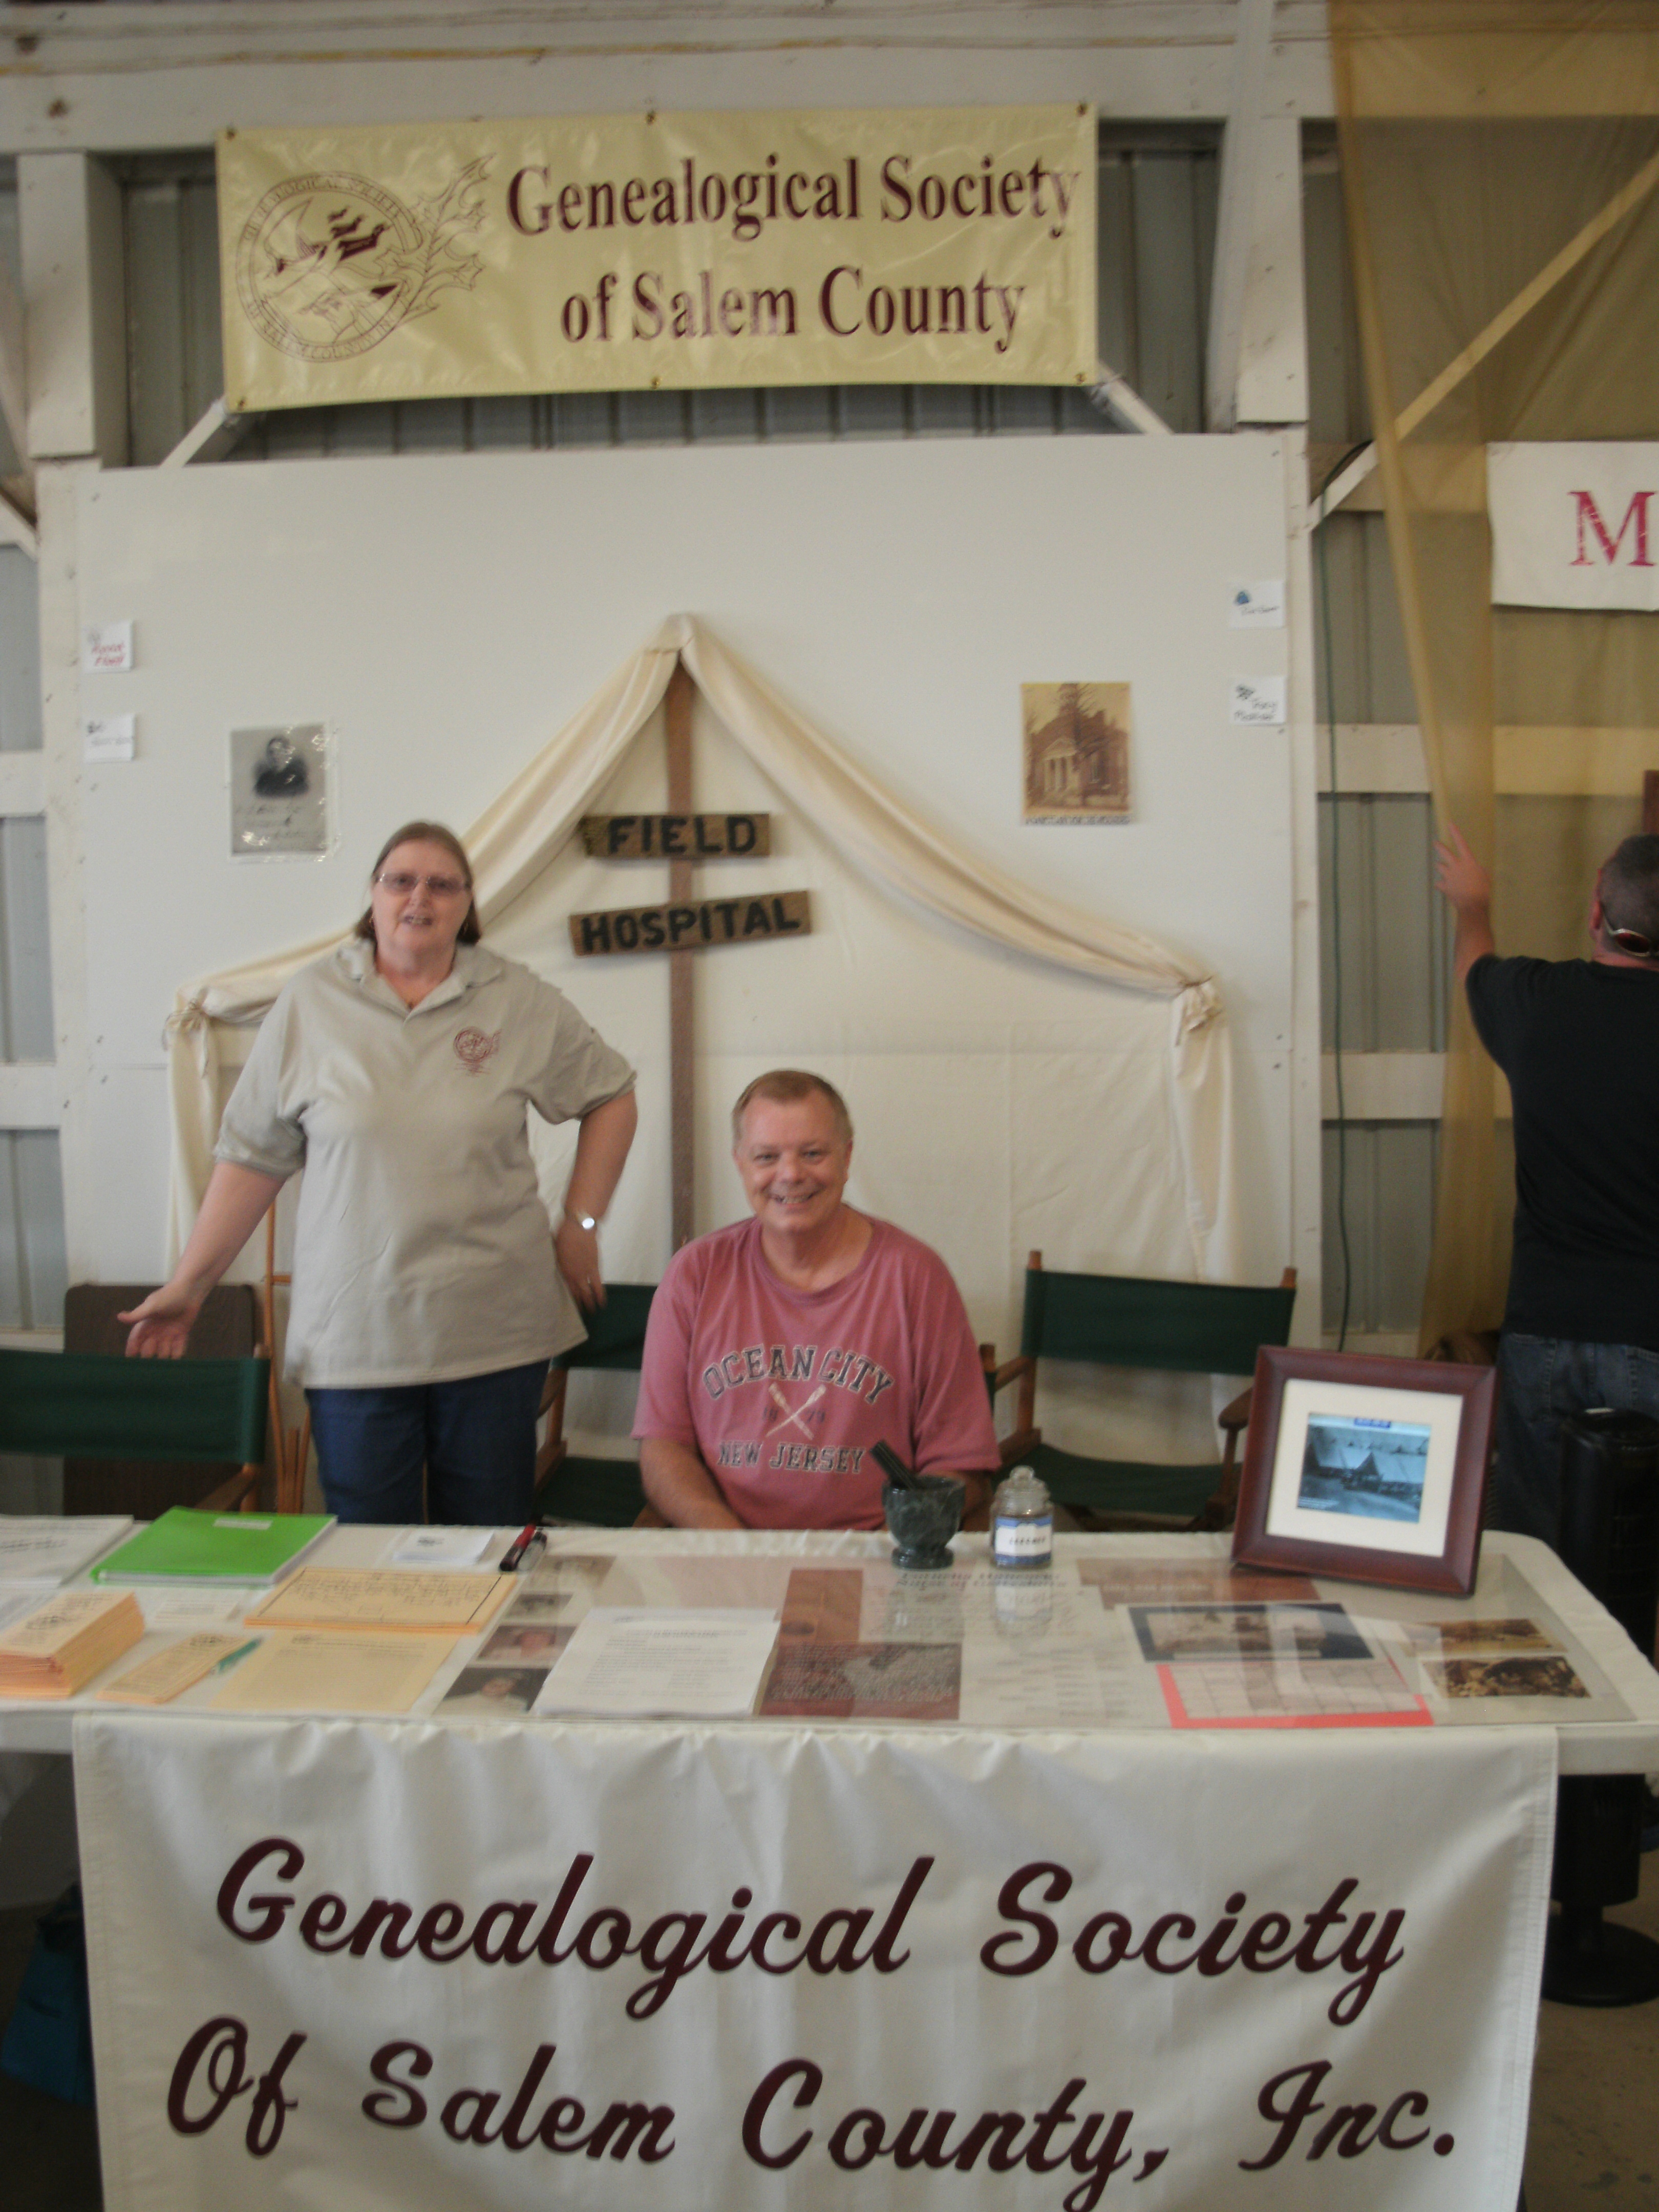 The Genealogical Society's booth at the Salem County Fair this year was modeled after a Civil War Hospital Tent.